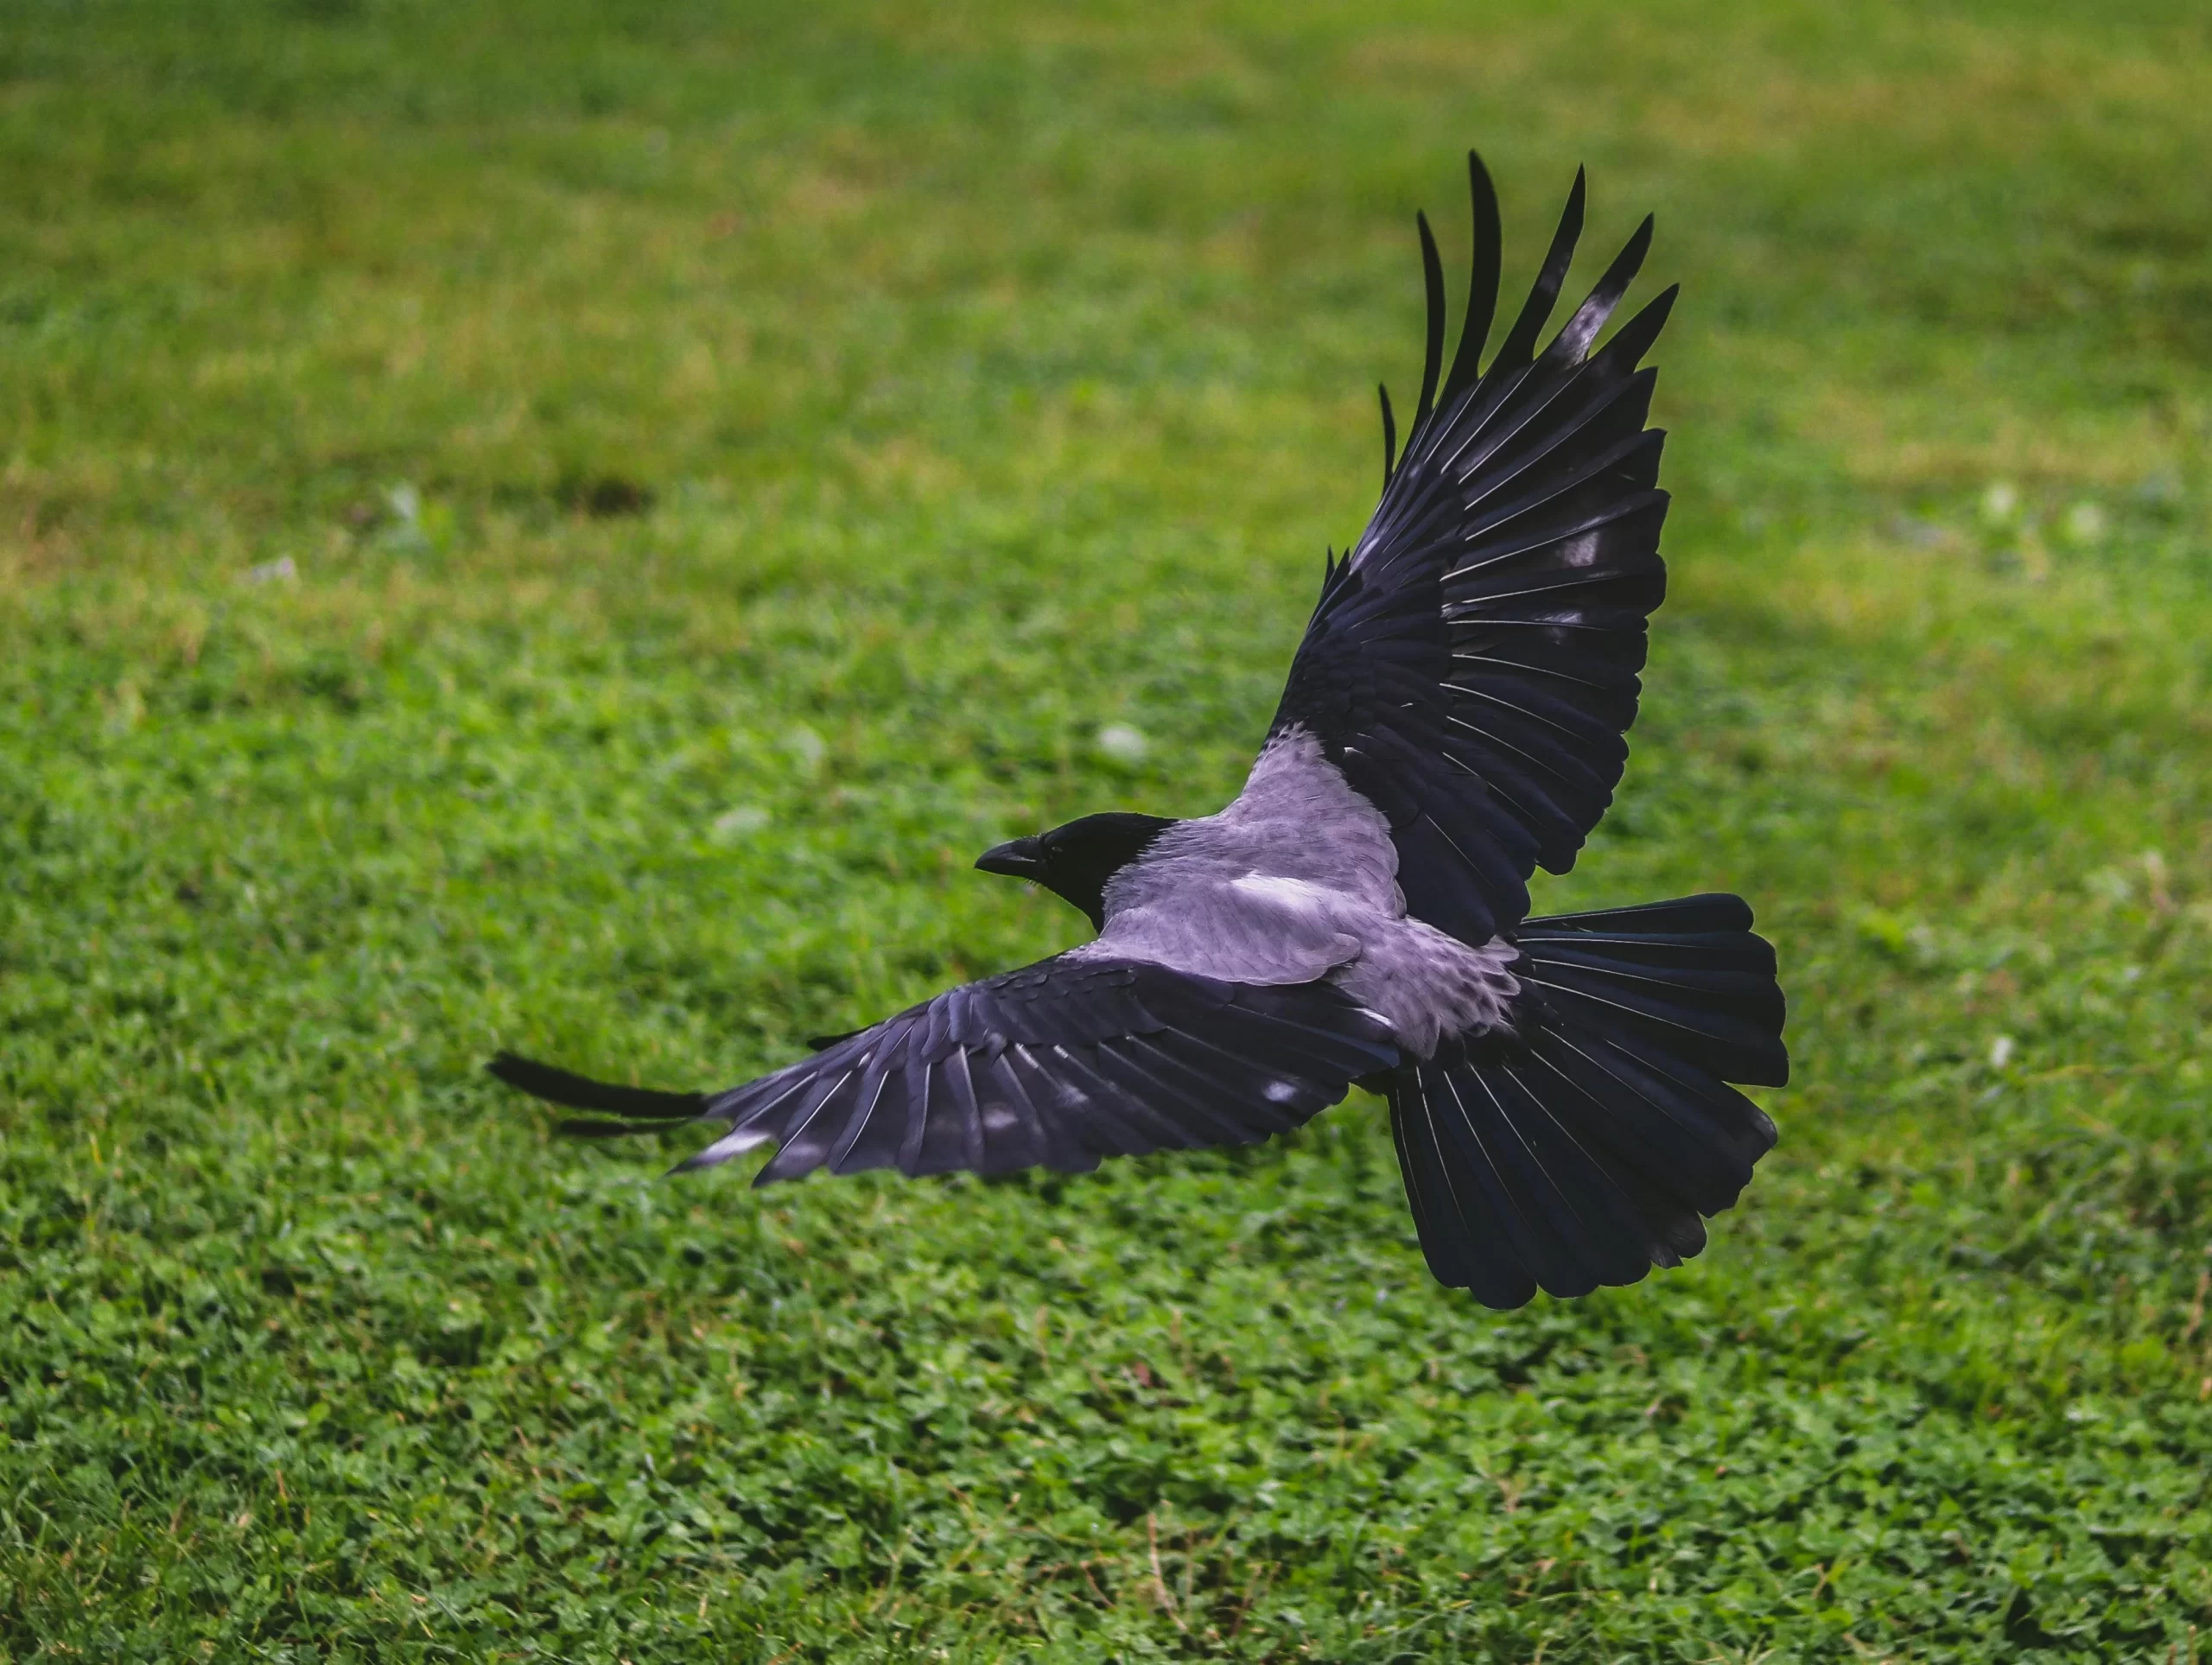 Do crows migrate? Here, a crow flies over a lush green field.